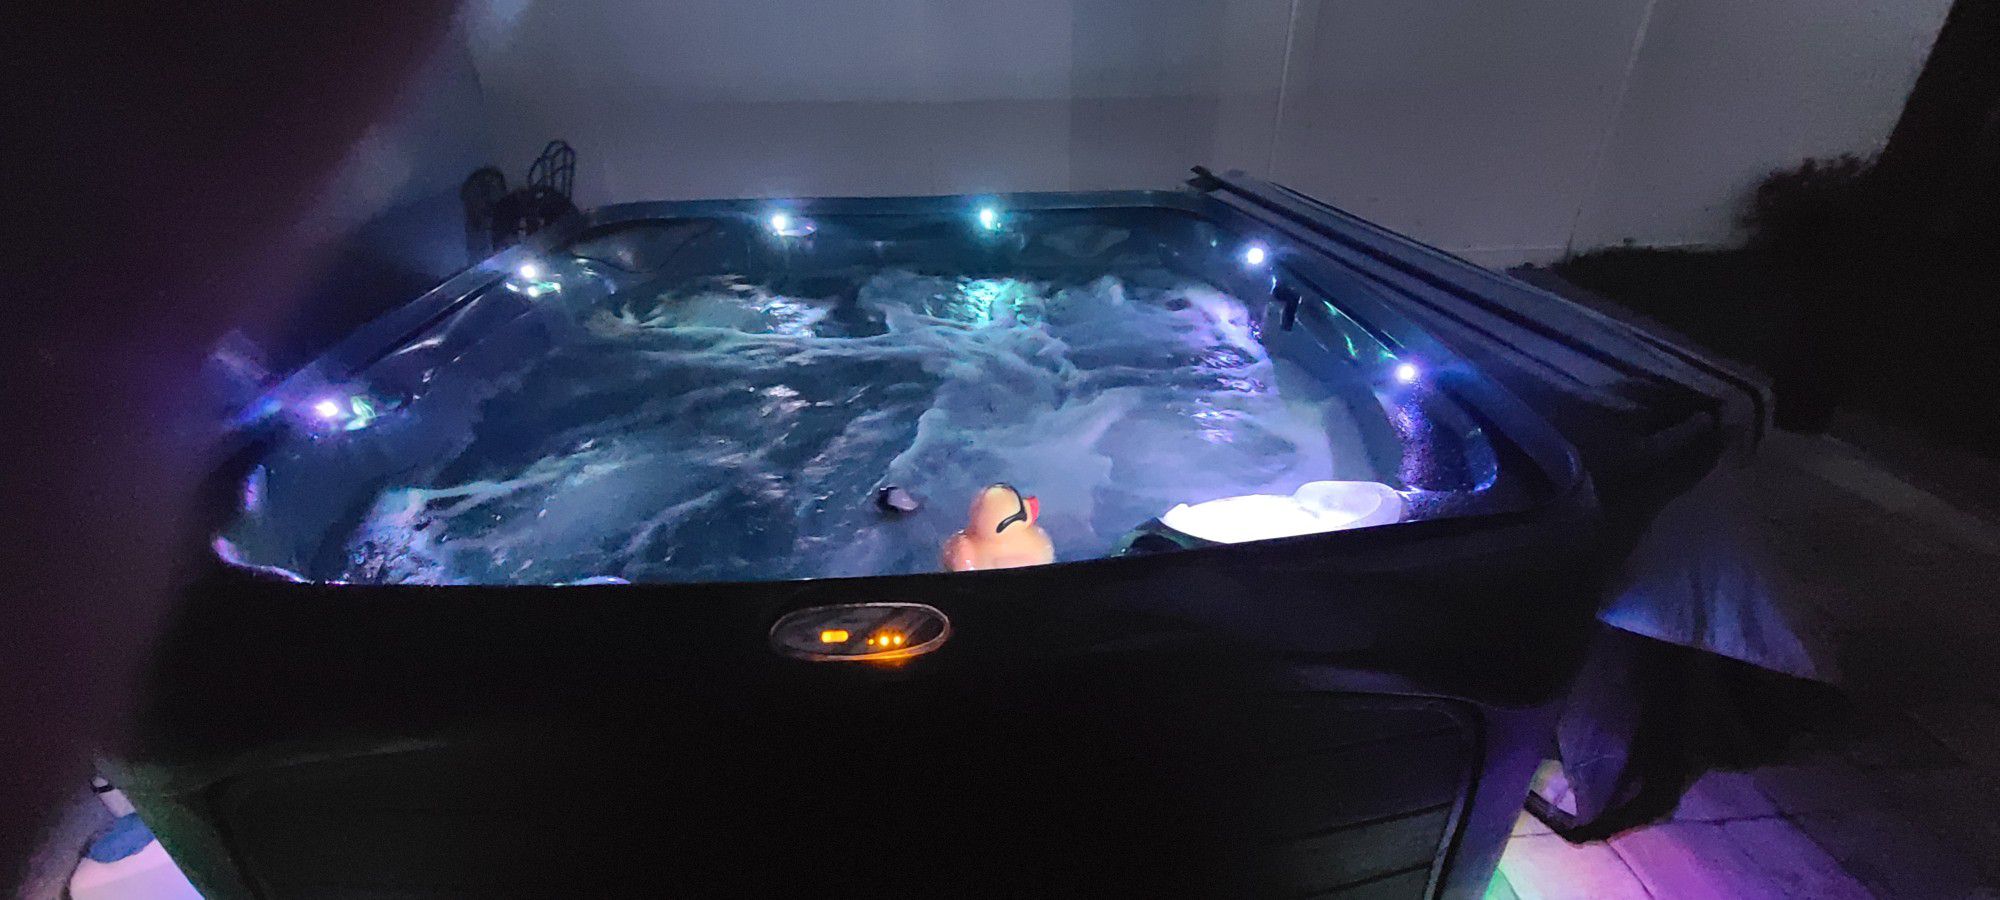 Hot TUB 🔥 🥵 FOR SALE